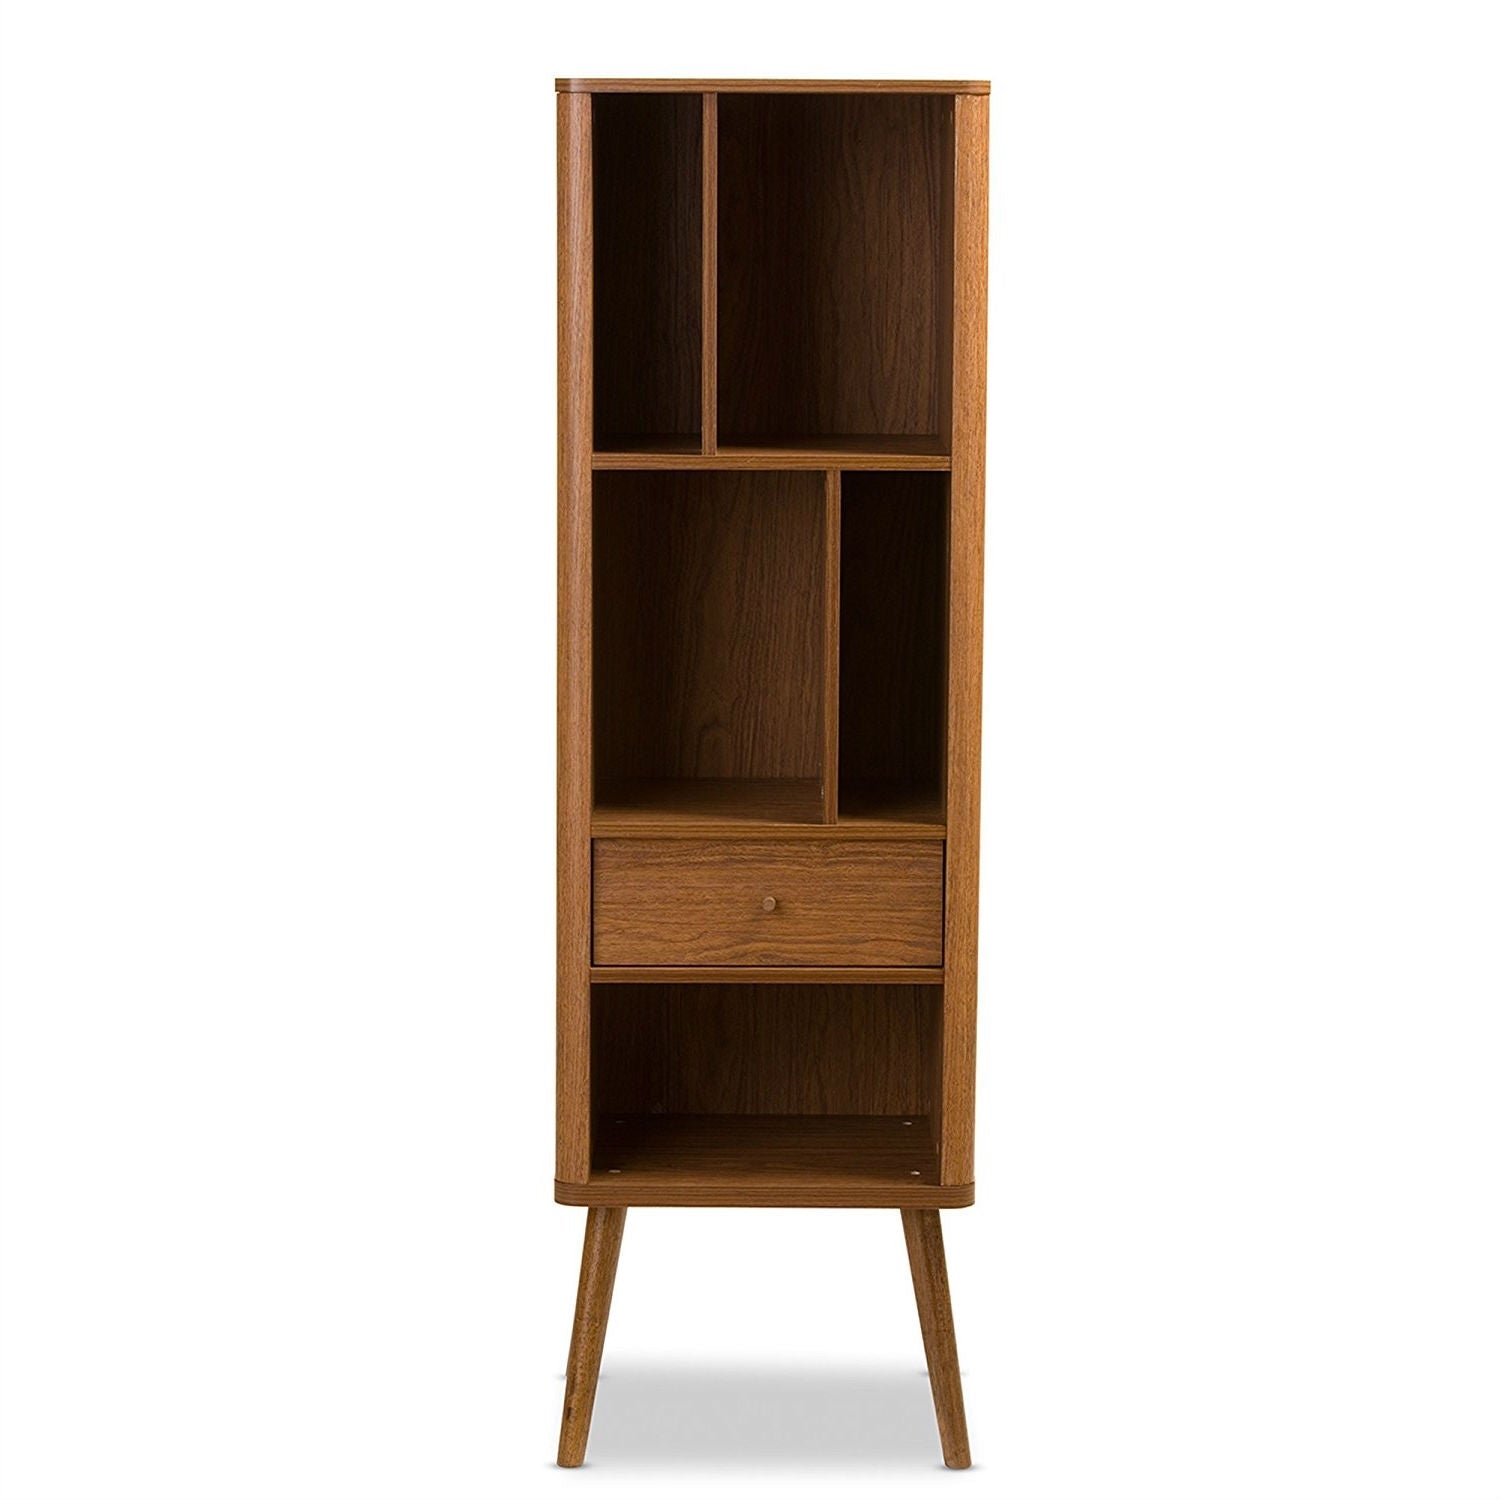 Living Room > Bookcases - Mid-Century Modern Classic Bookcase Sideboard Cabinet